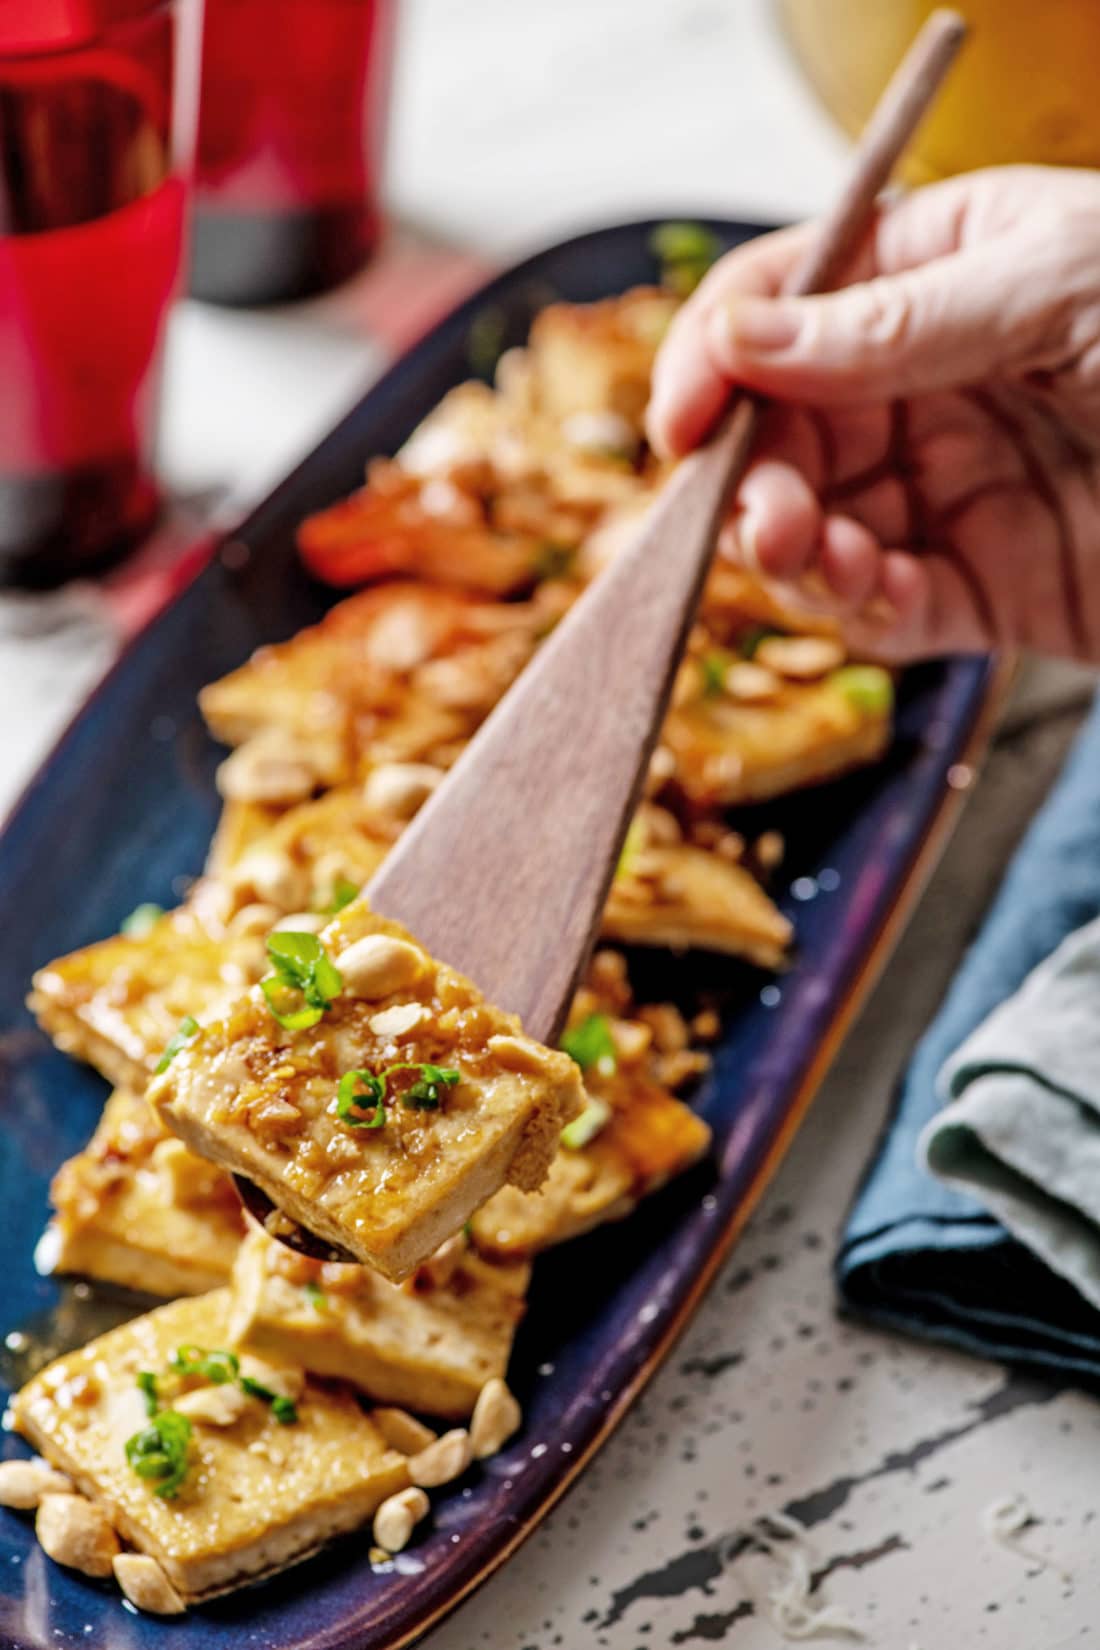 Wooden spatula with a piece of Spicy, Sweet and Nutty Tofu.